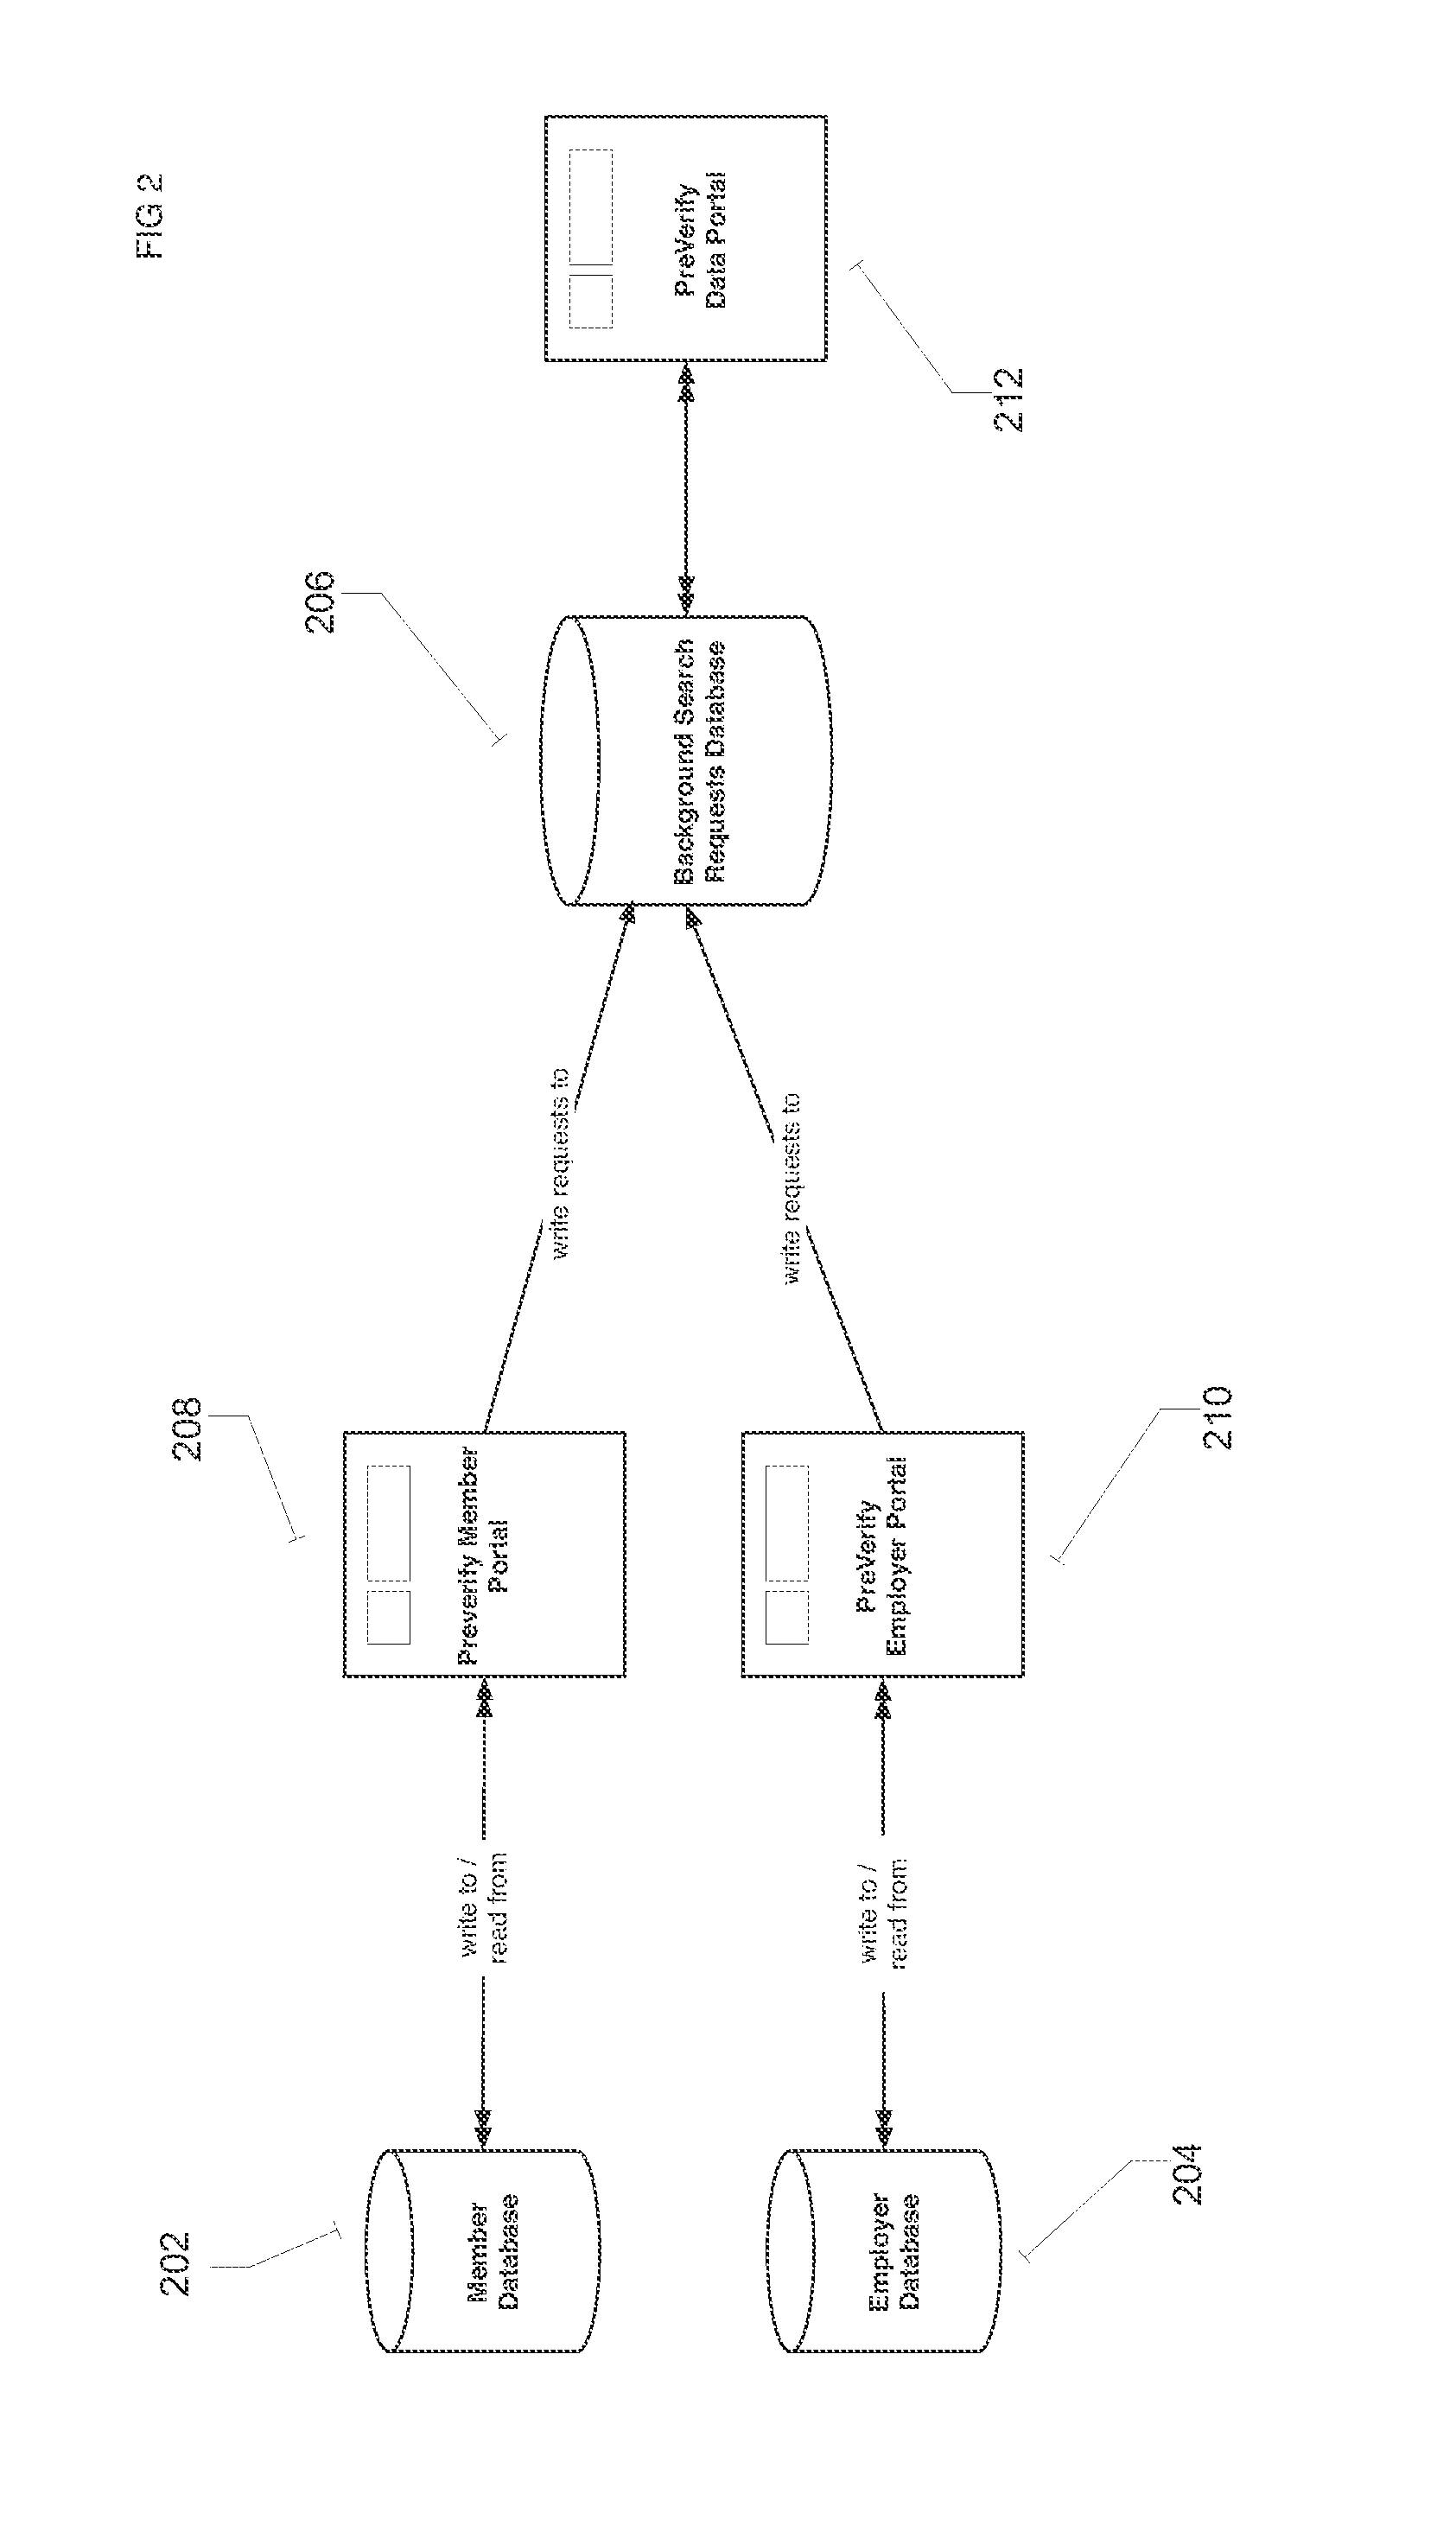 System and method for authorization and disclosure for background information searches